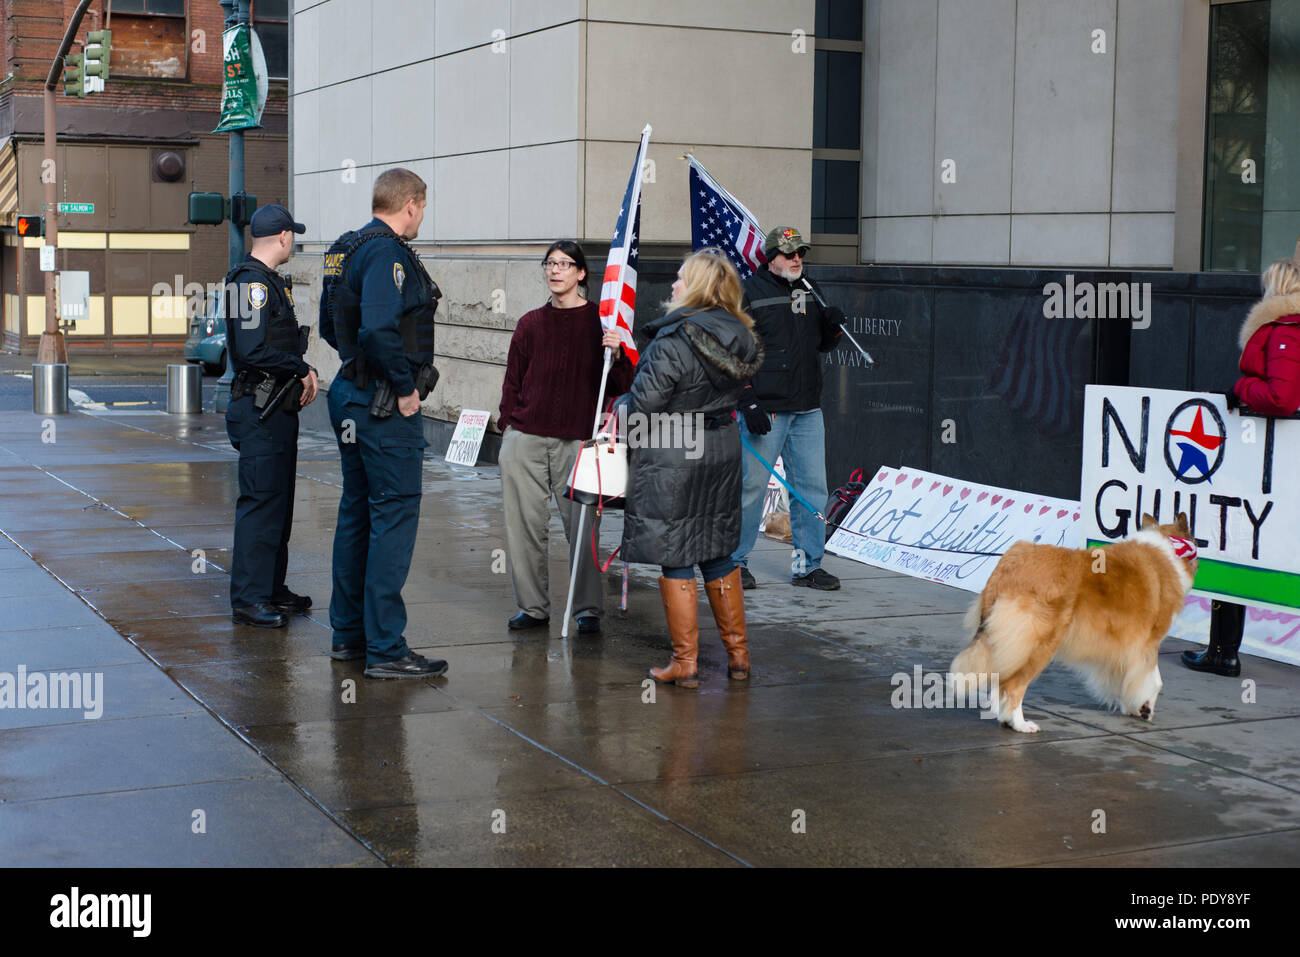 David Fry and others protesting the second trial Malheur Wildlife Refuge occupation talking to police Stock Photo